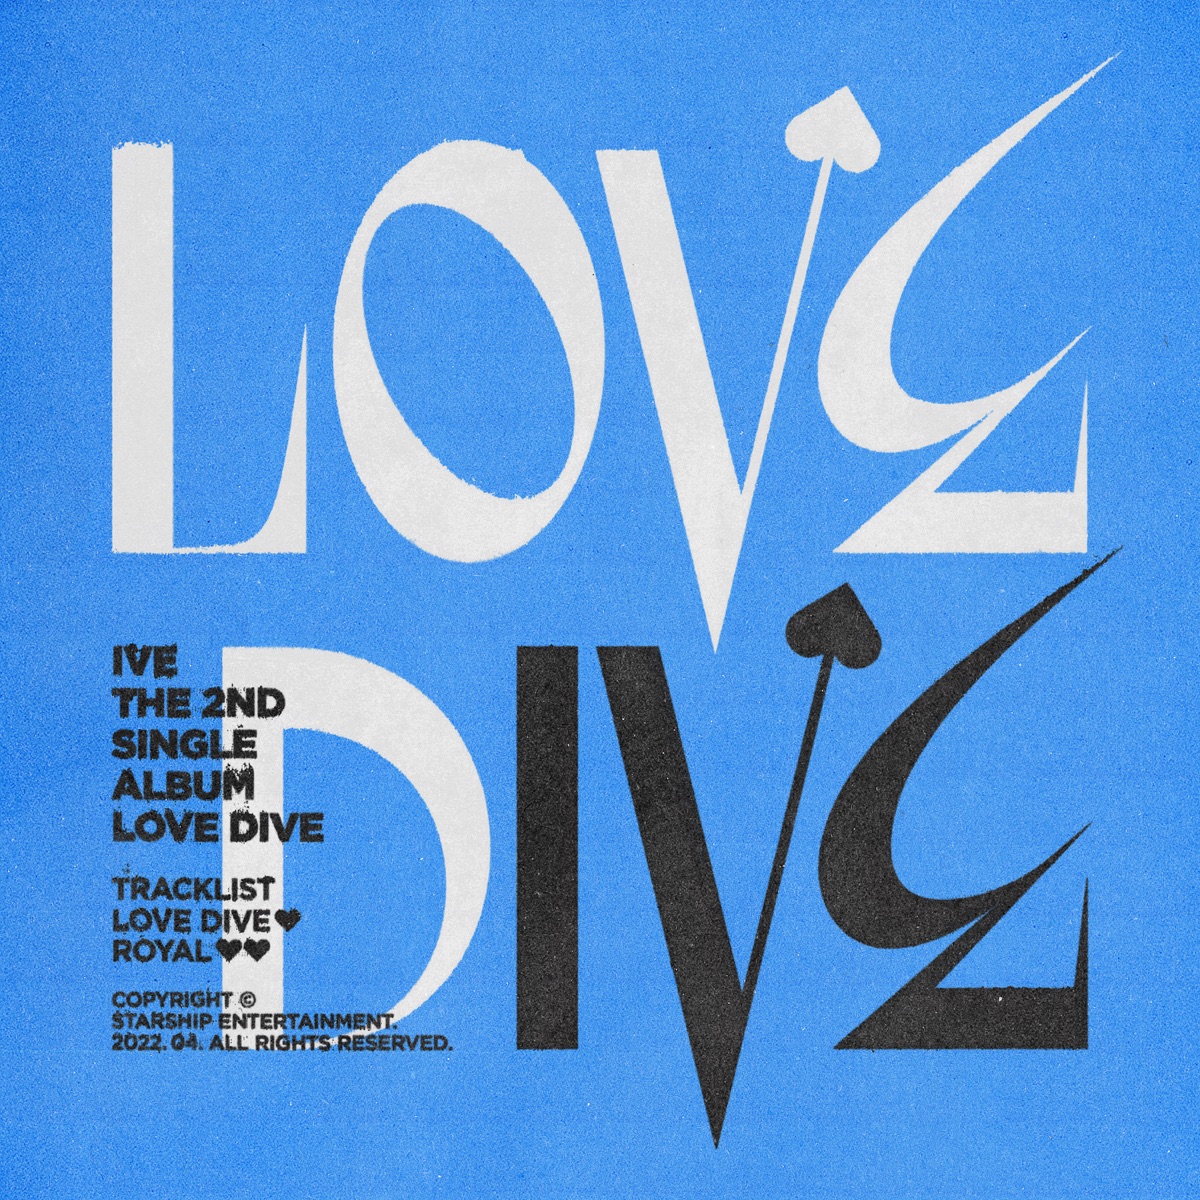 Cover for『IVE - LOVE DIVE』from the release『LOVE DIVE』